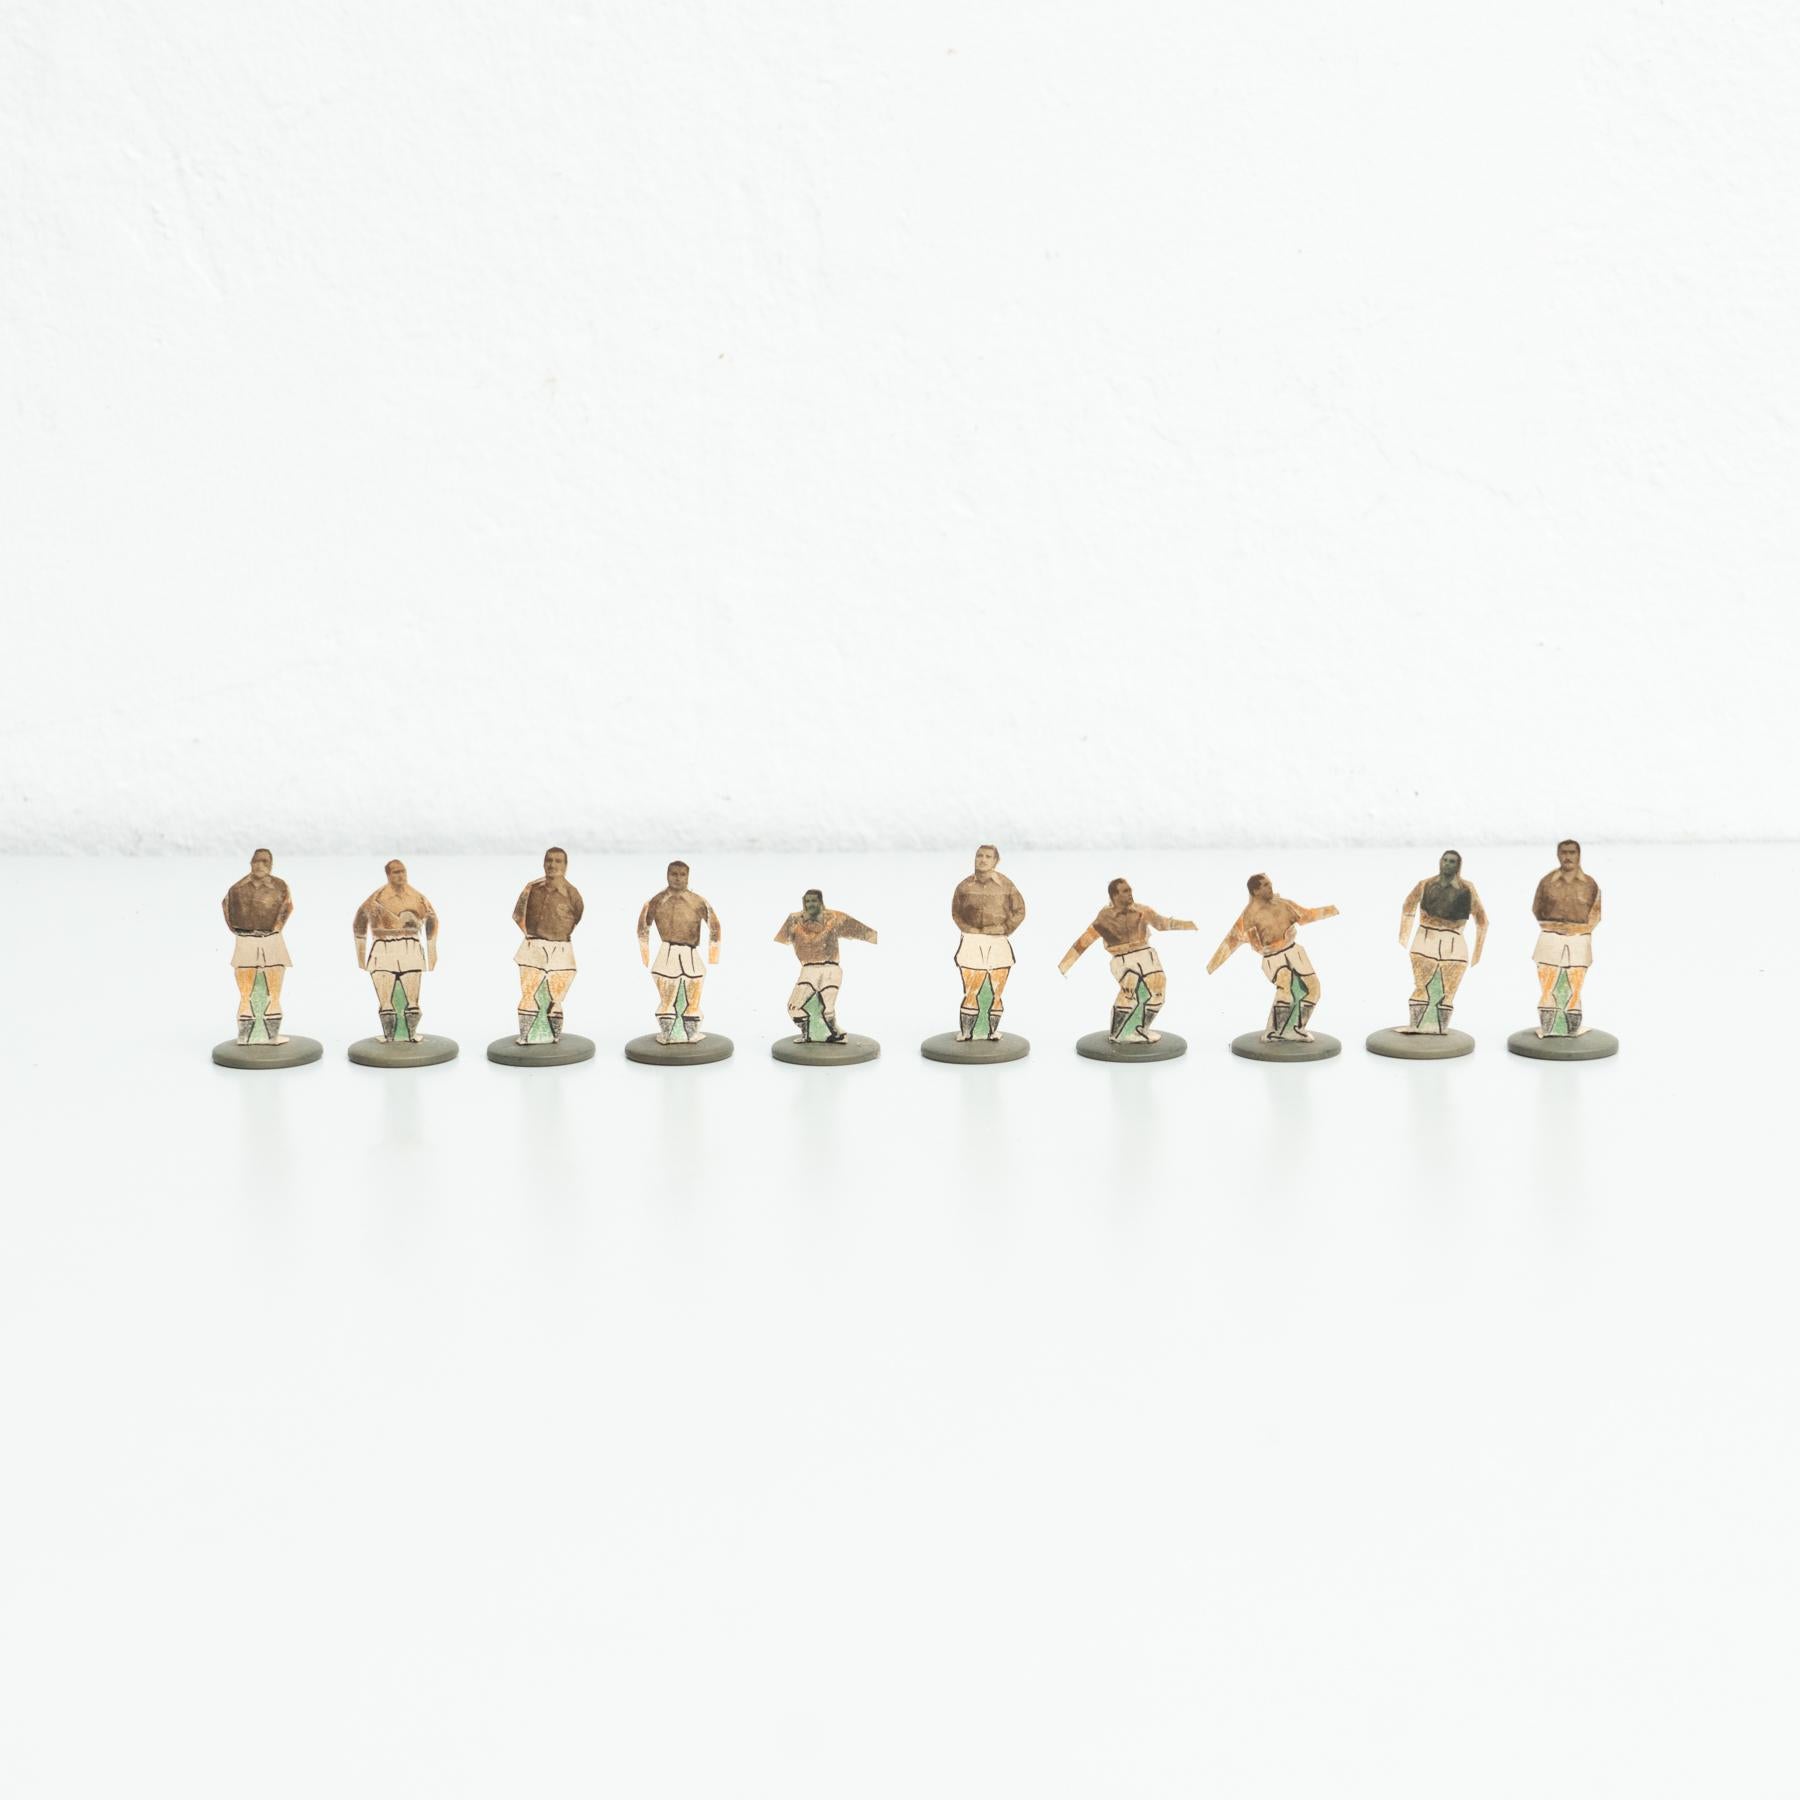 Set of ten table button soccer game players. Traditional figures used to play this classic button Spanish game. 

Manufactured in Spain, circa 1950.

In original condition, with minor wear consistent with age and use, preserving a beautiful